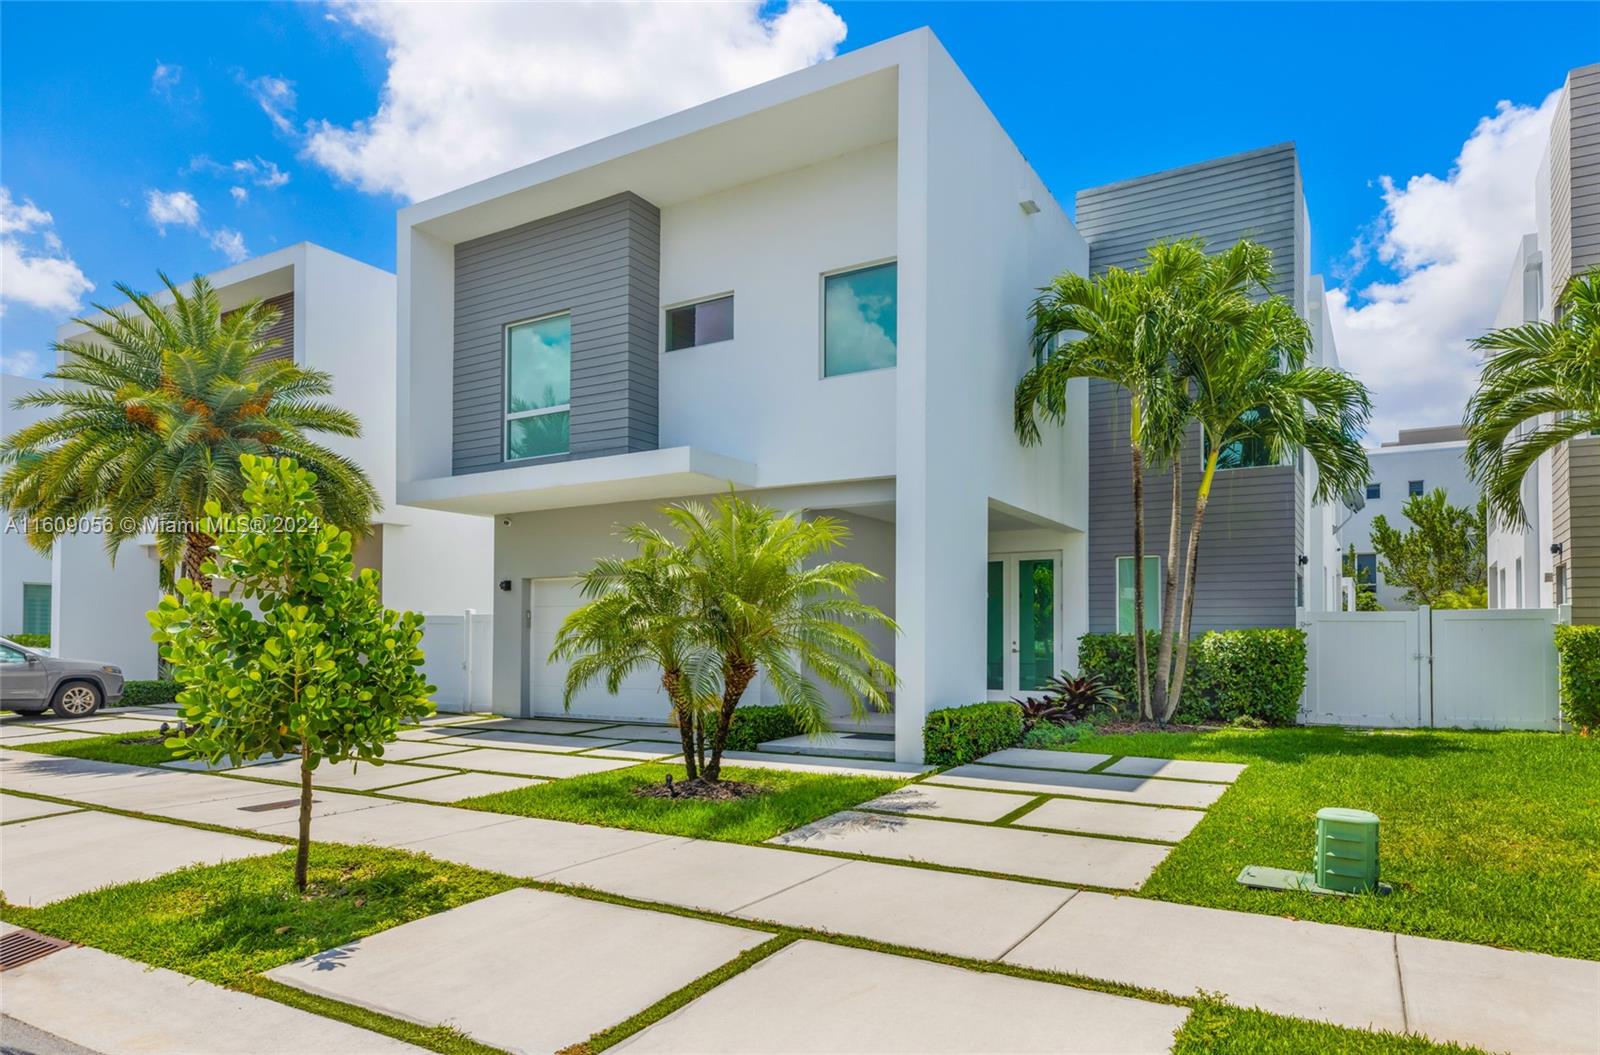 Discover luxury living in this beautiful 5-bedroom, 5-bathroom home at The Mansions at Doral. Located in a prestigious community, this property features modern finishes and high-end upgrades, including elegant marble floors. Each bedroom offers comfort and style, while the spacious living areas are perfect for entertaining and daily living. Enjoy the best of Doral in this prime location. Schedule a private tour today and see all this exceptional home has to offer.